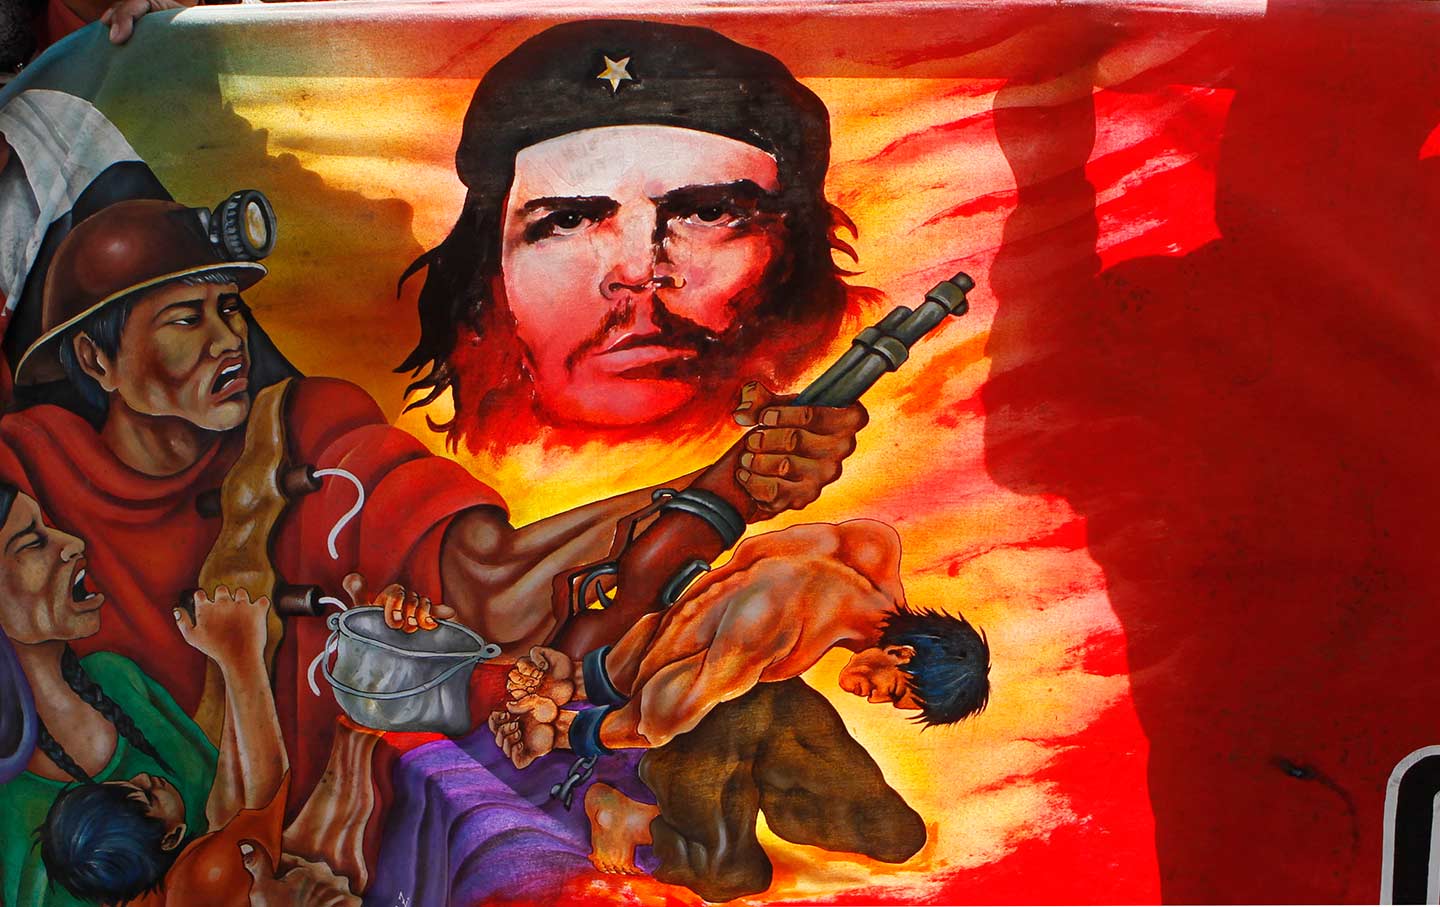 Che Guevara's legacy still contentious 50 years after his death in